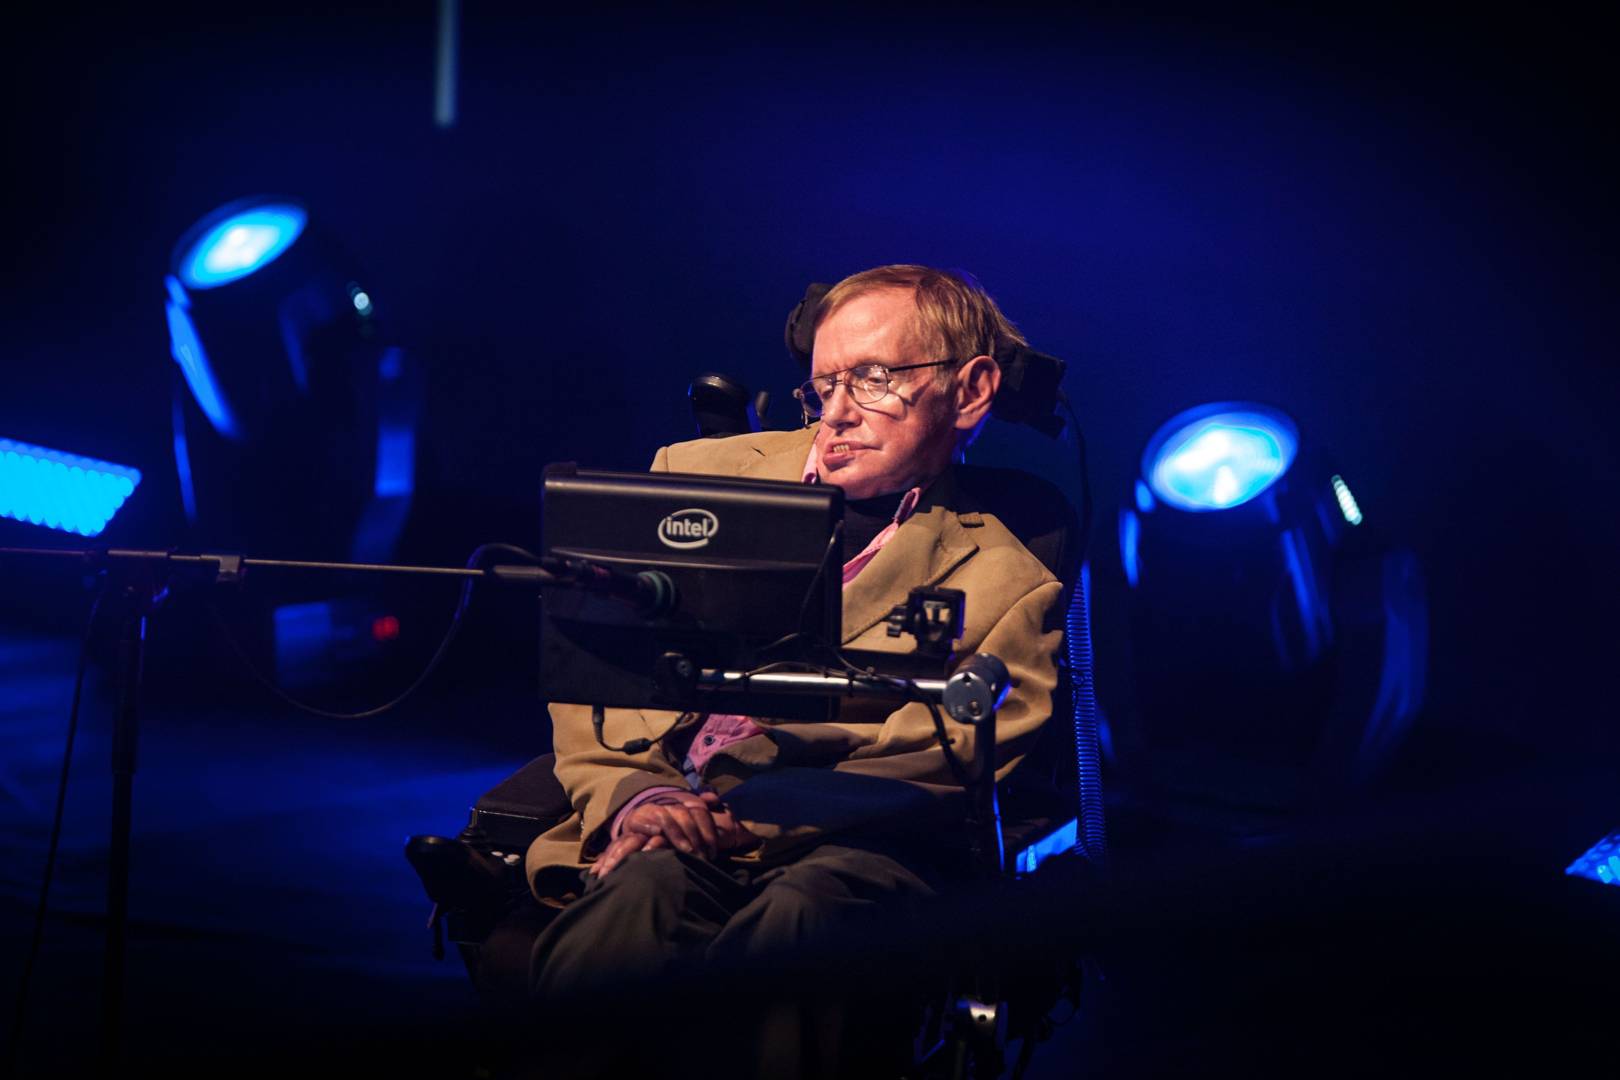 Stephen Hawking believes we have 100 years left on Earth – and he's not the only one